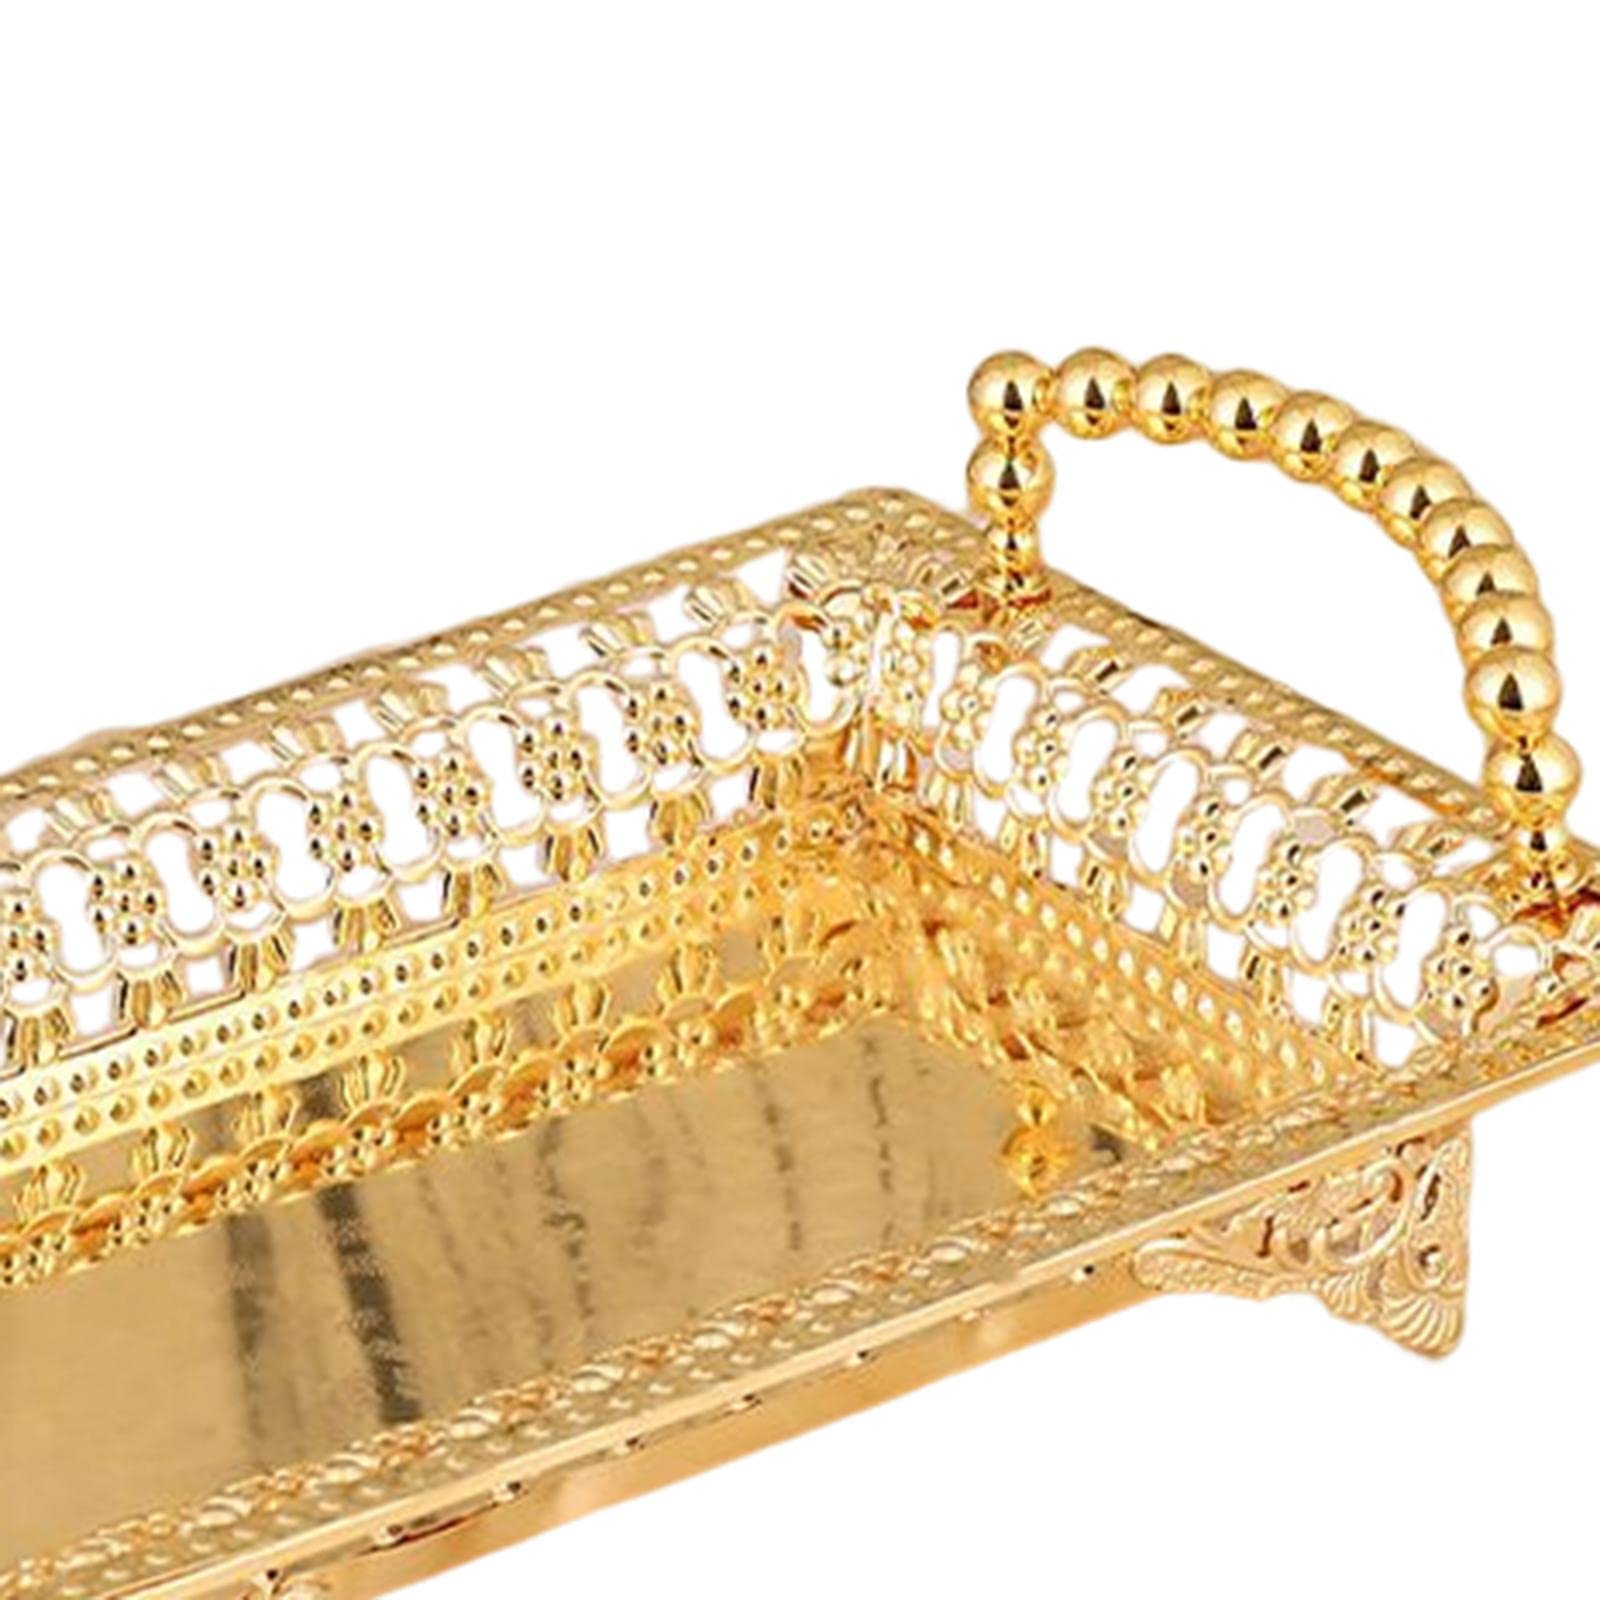 Luxury Serving Tray Golden Rectangle with Handle Srage Container Display Tray Serving Platter Table Organizer Food Tray for Restaurant, Large